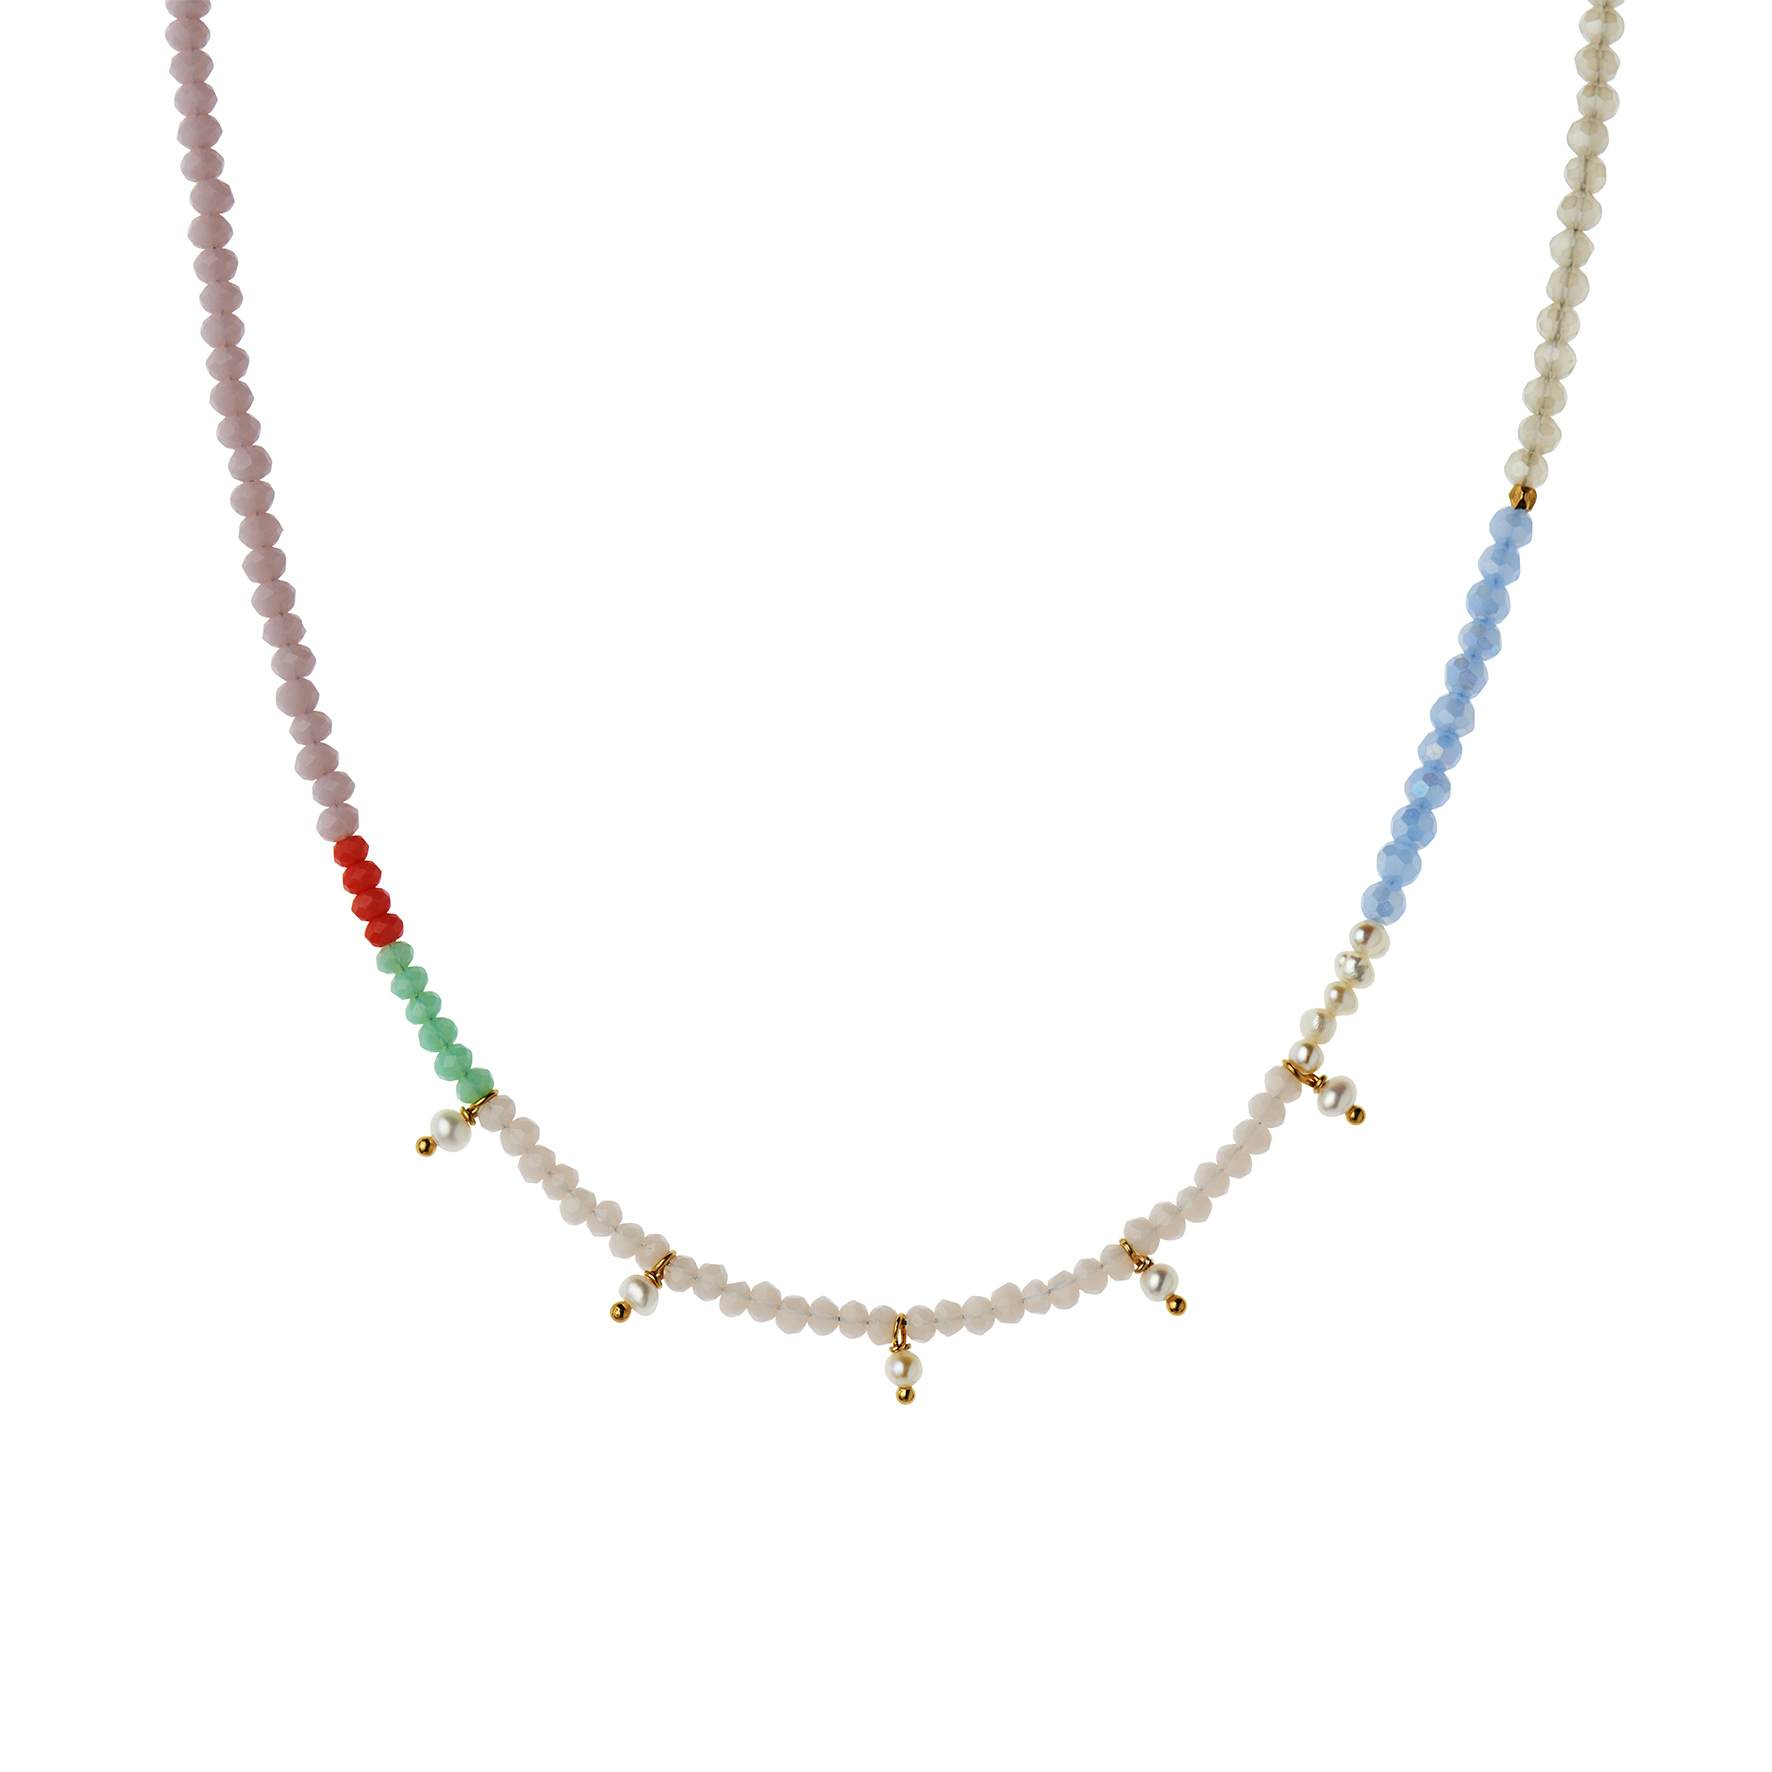 Heavenly Pearl Dream Necklace With Five Pendants Coral & Cool Mint